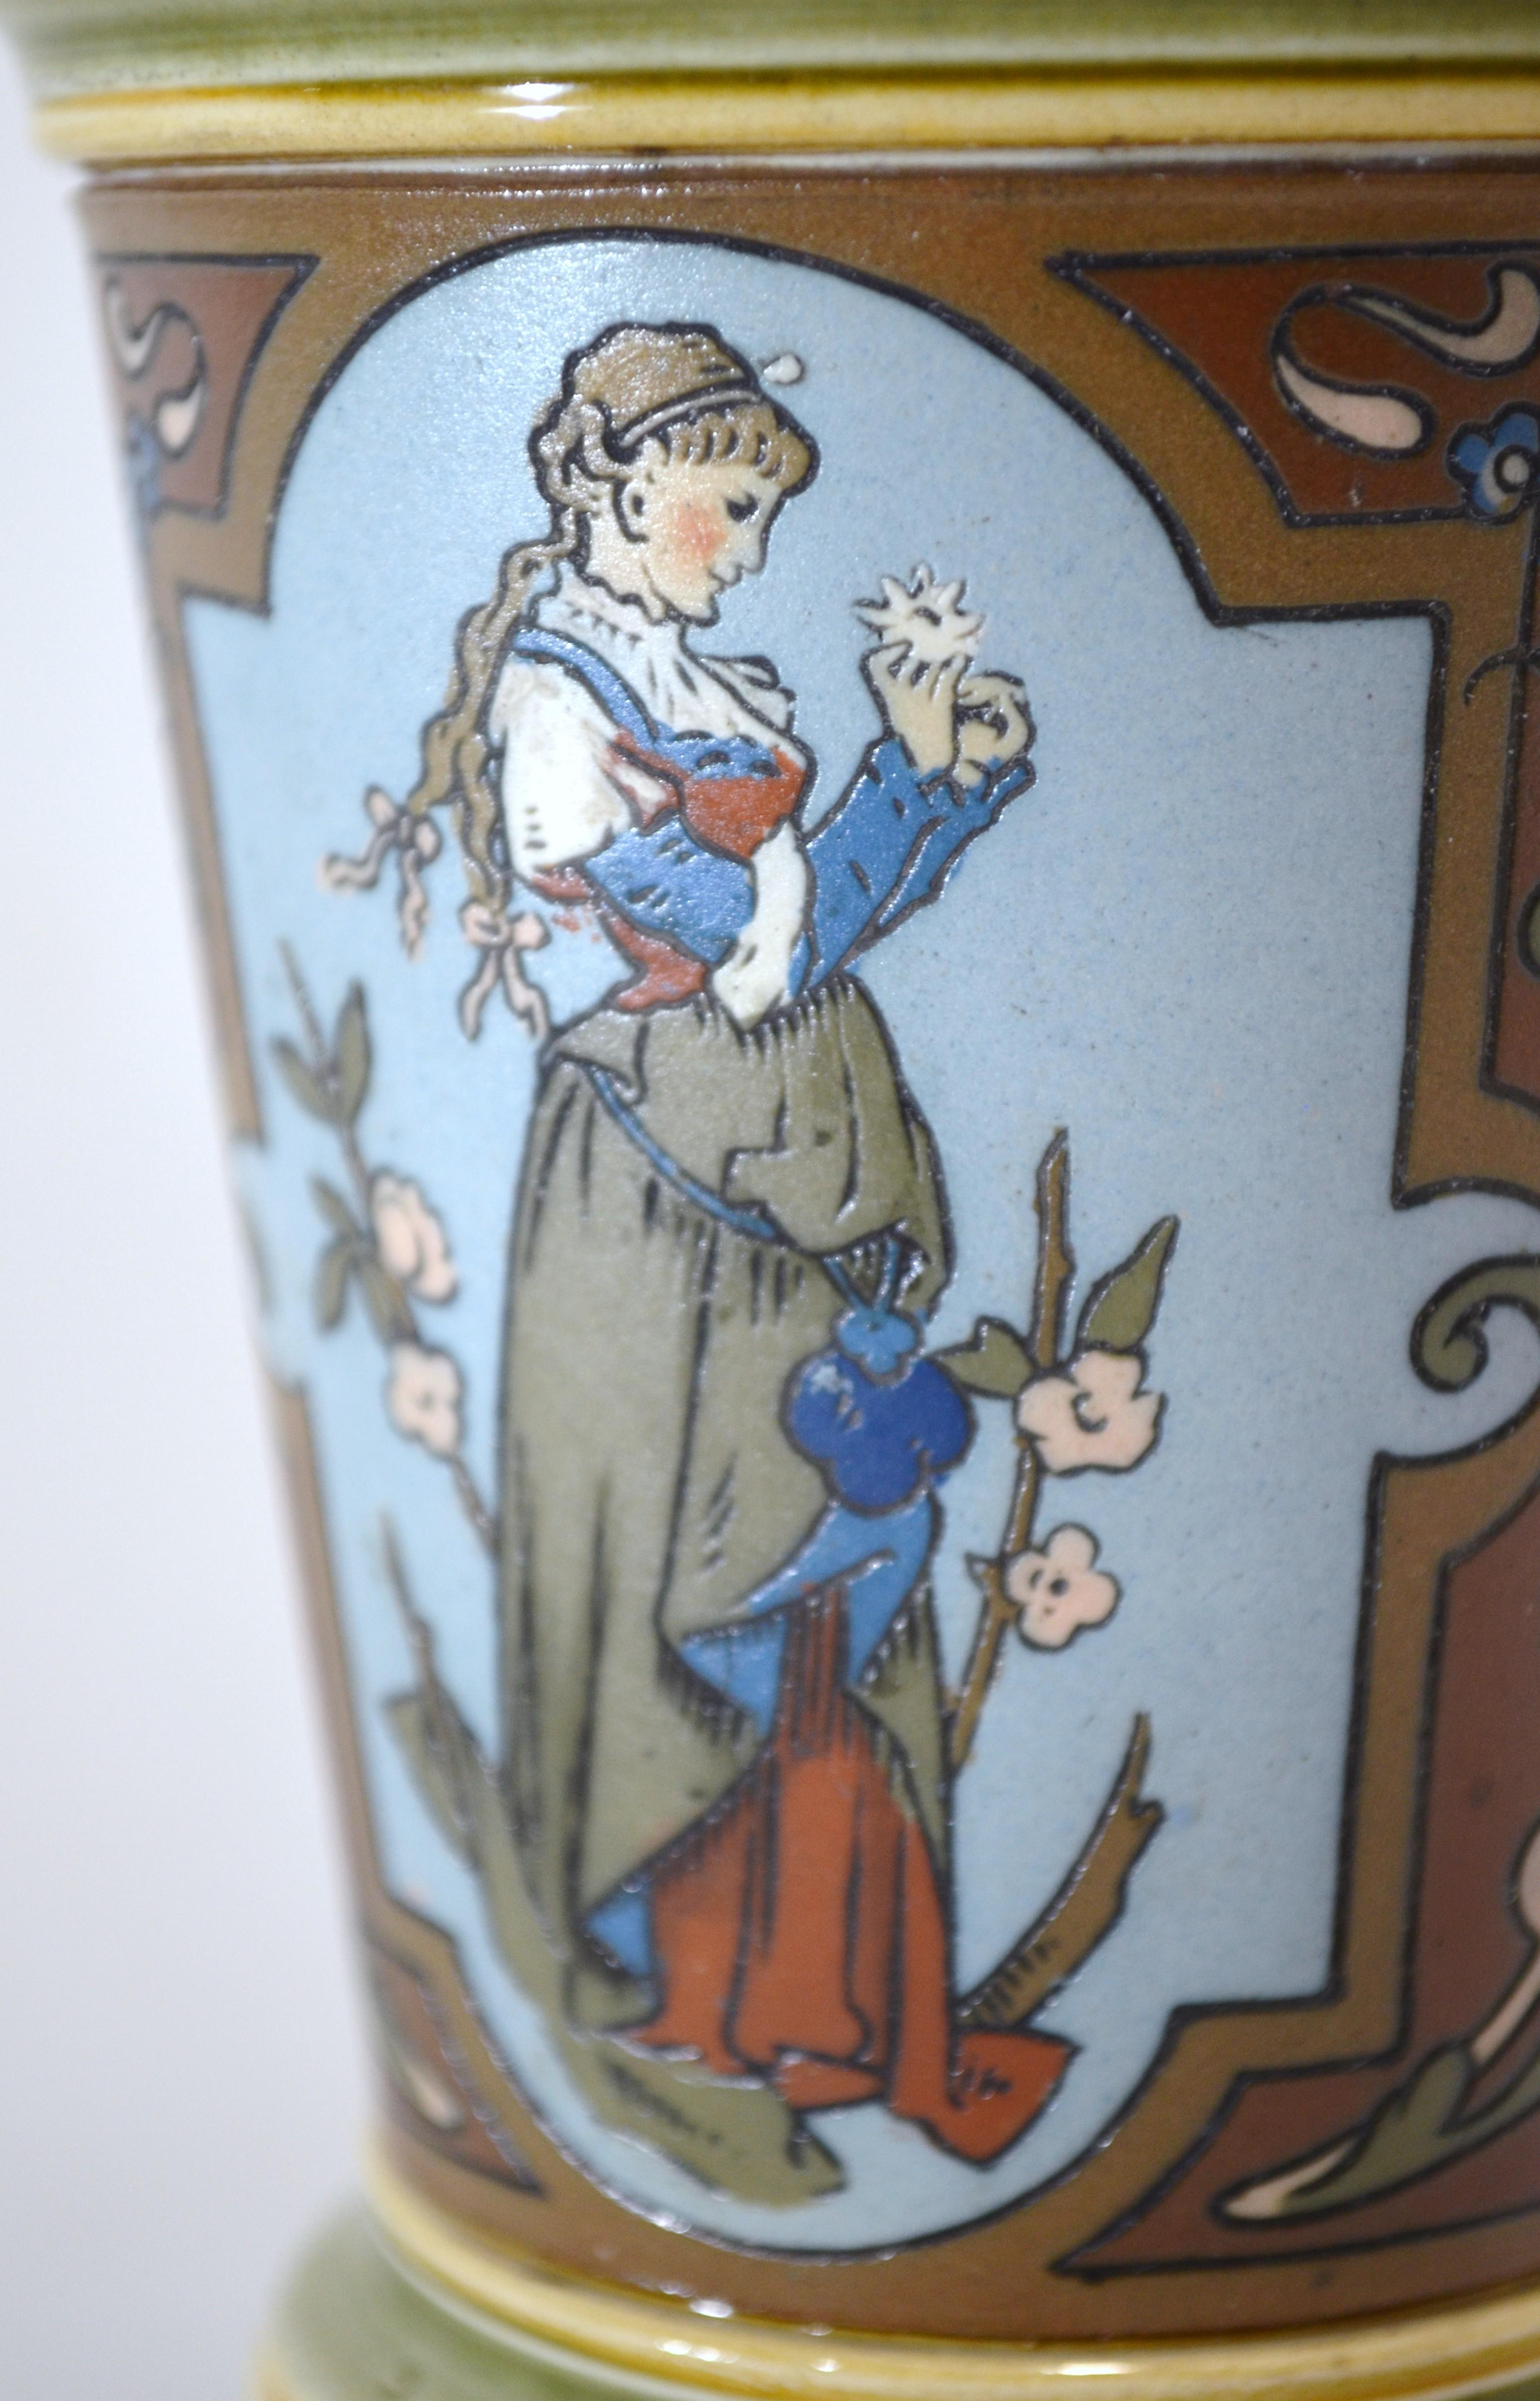 Villeroy and Boch Mettlach 1890 1900 Mosaic Ceramic Vase Decorated with Women For Sale 2